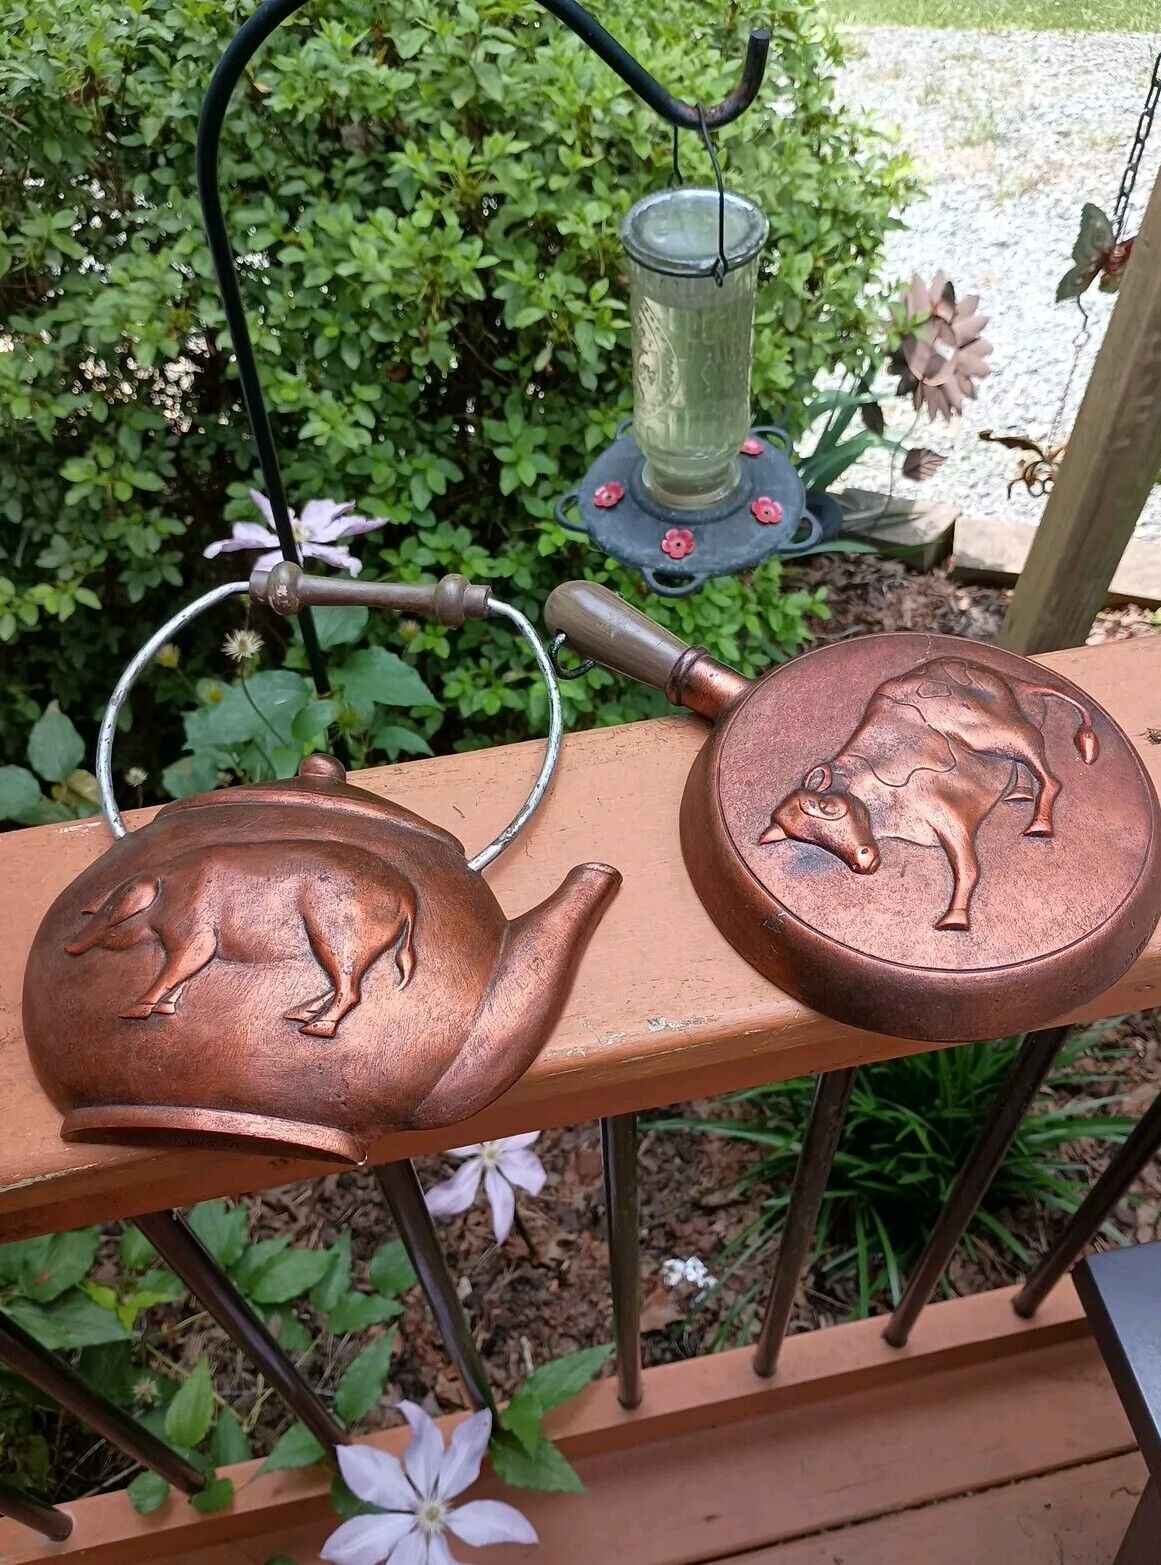 Vtg  1970s Set, 2 Resin Copper Colored Teapot/Pan Hanging Kitchen Cow/Pig Rustic